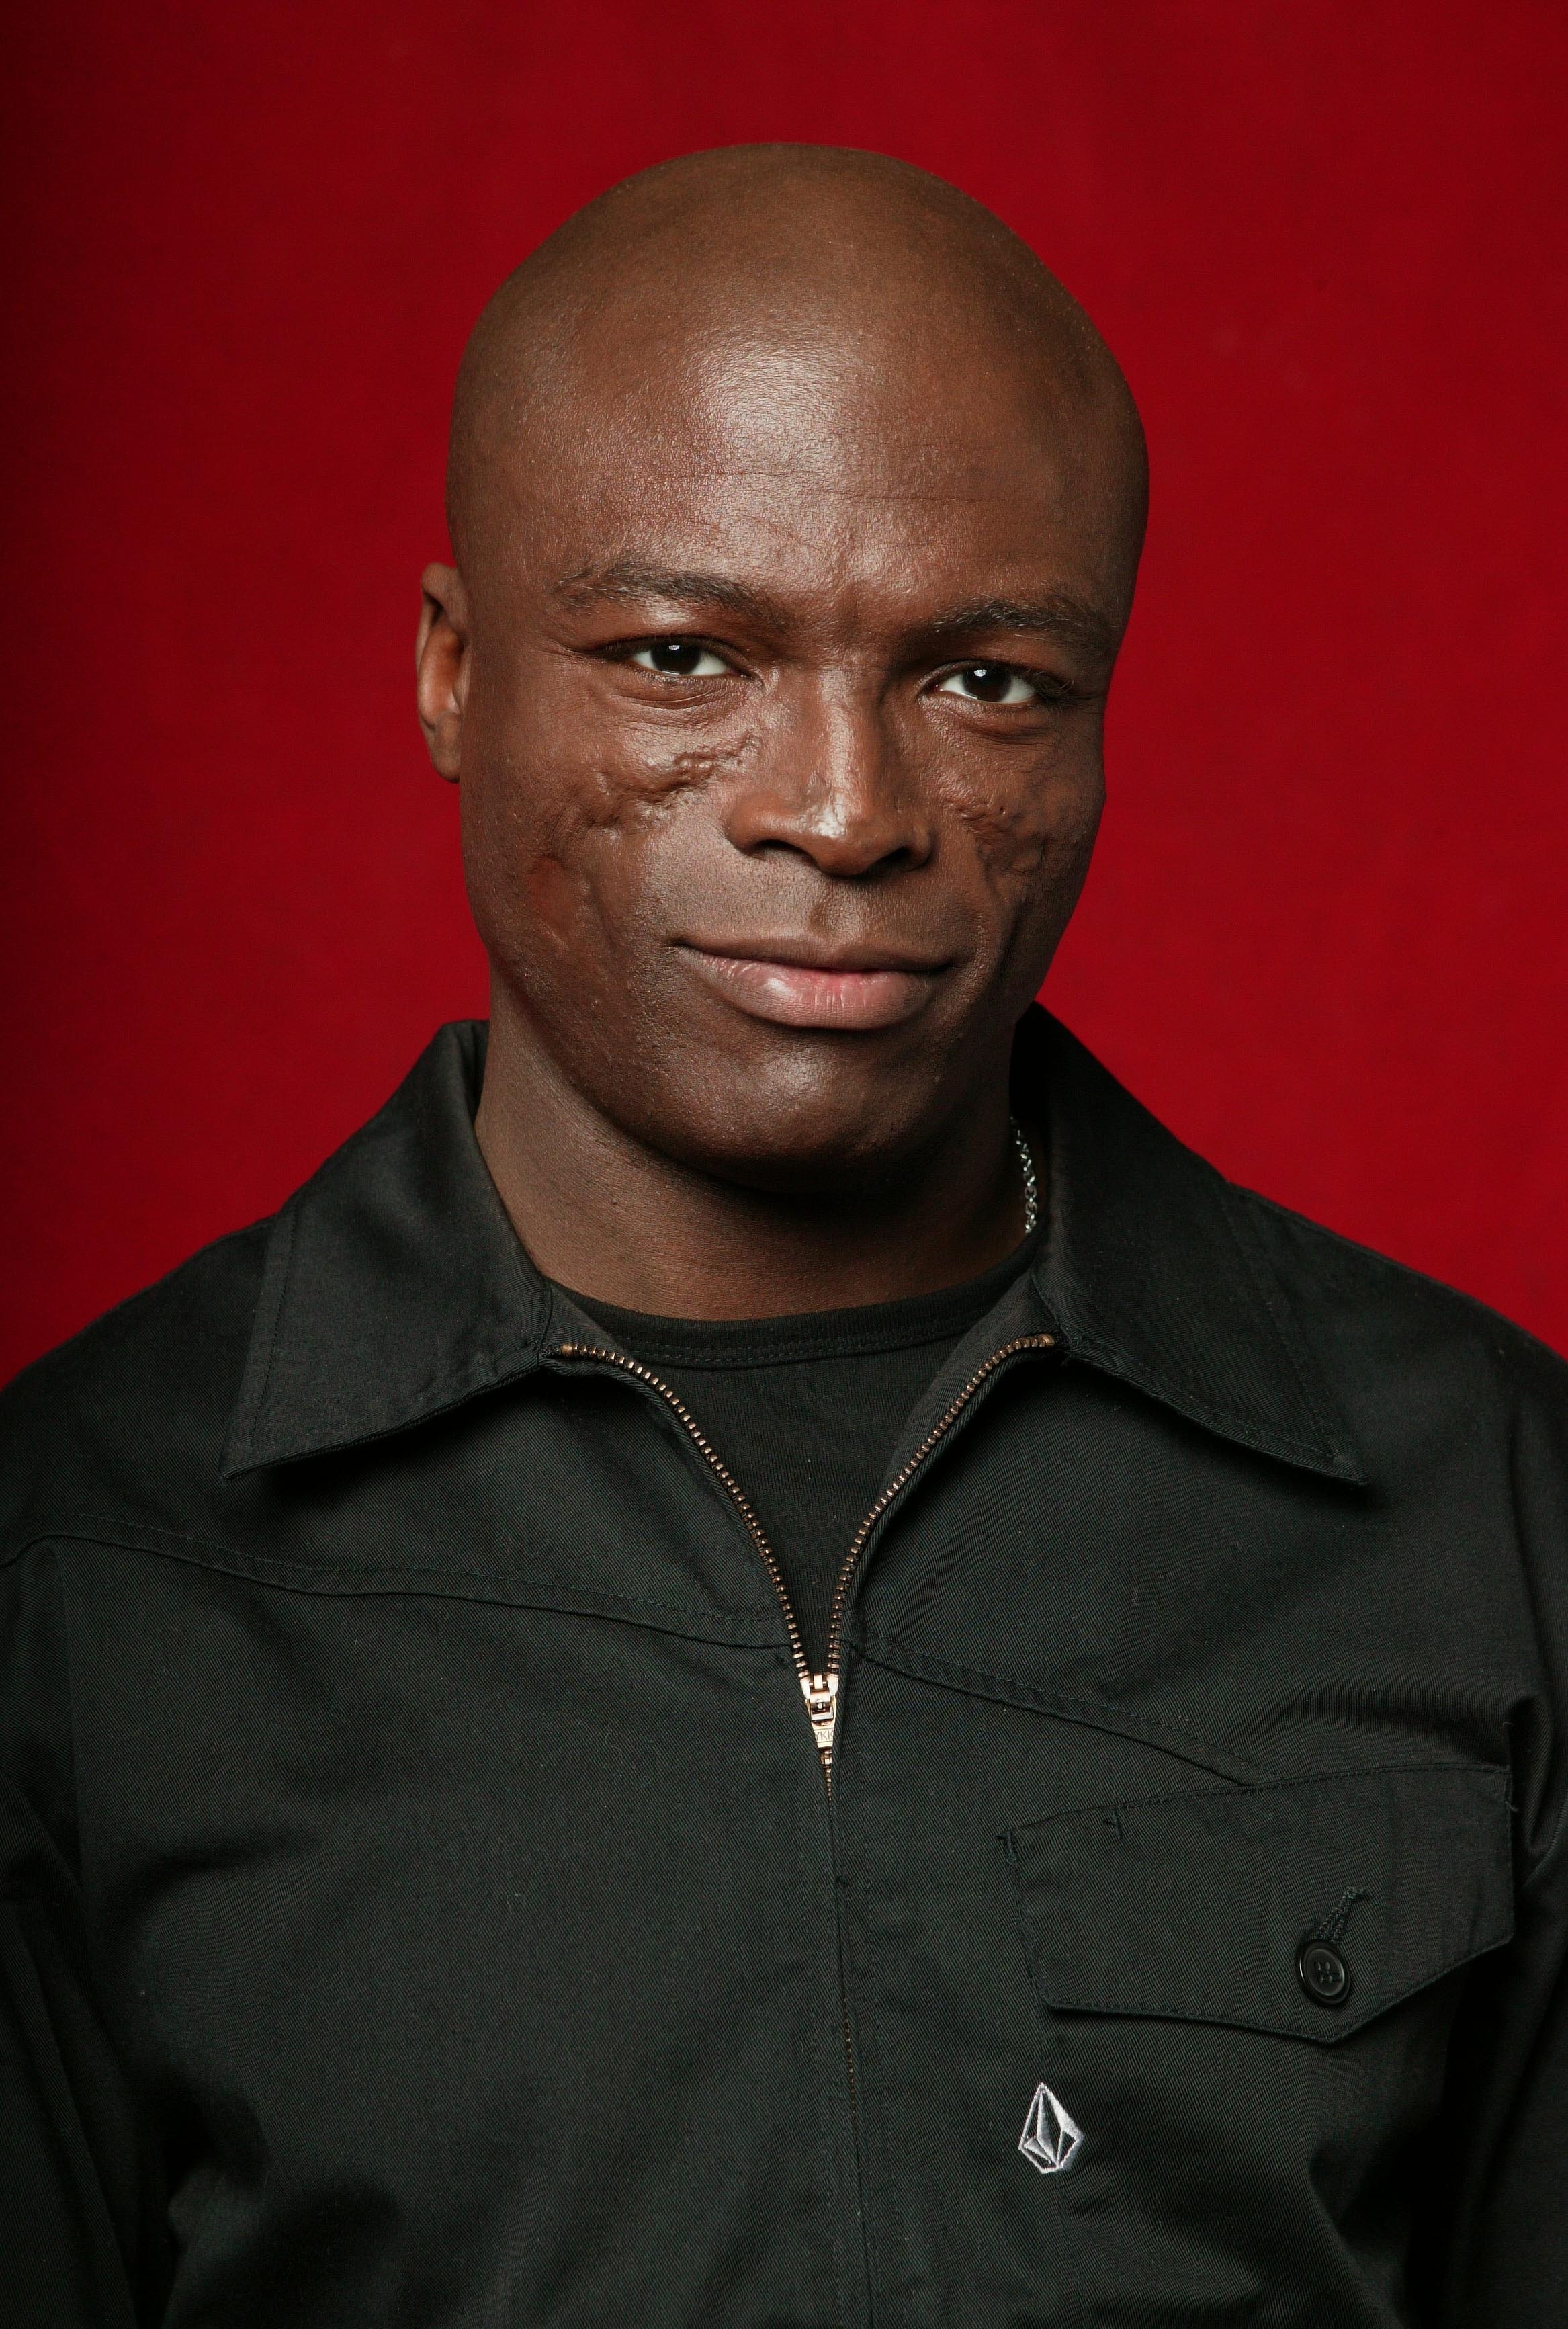 Seal at the NRJ Music Awards on January 24, 2004. | Source: Getty Images